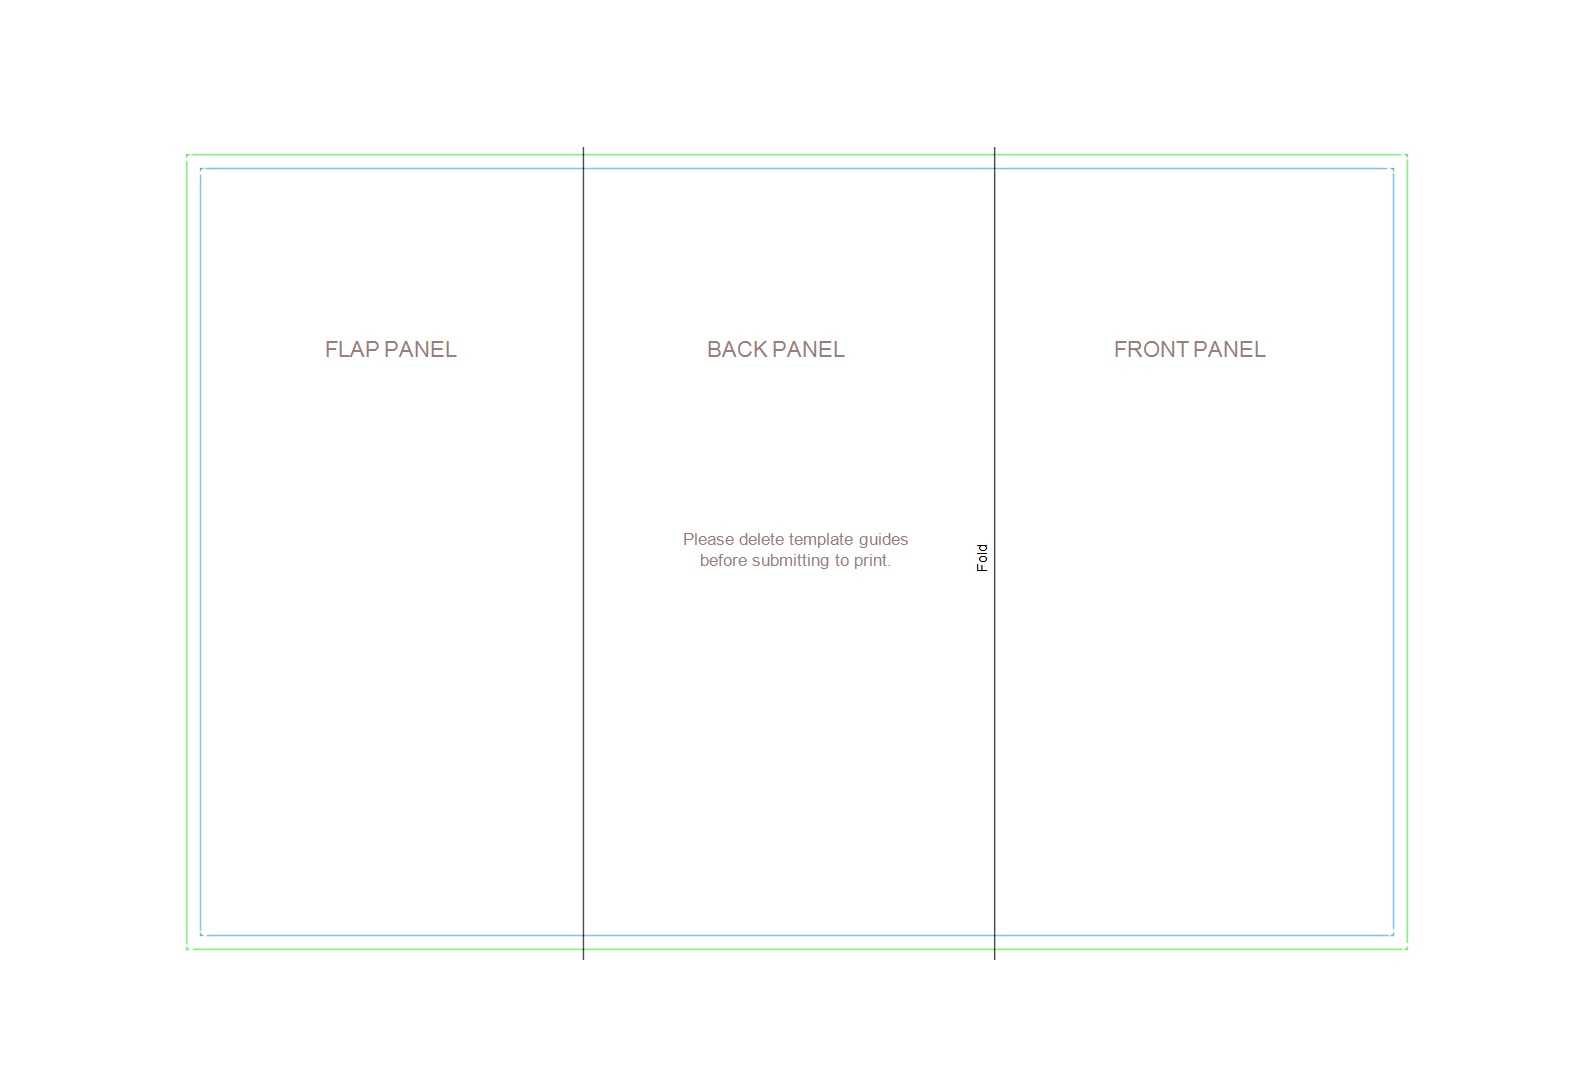 Pamphlet Template Docs - Dalep.midnightpig.co Pertaining To Google Drive Brochure Template